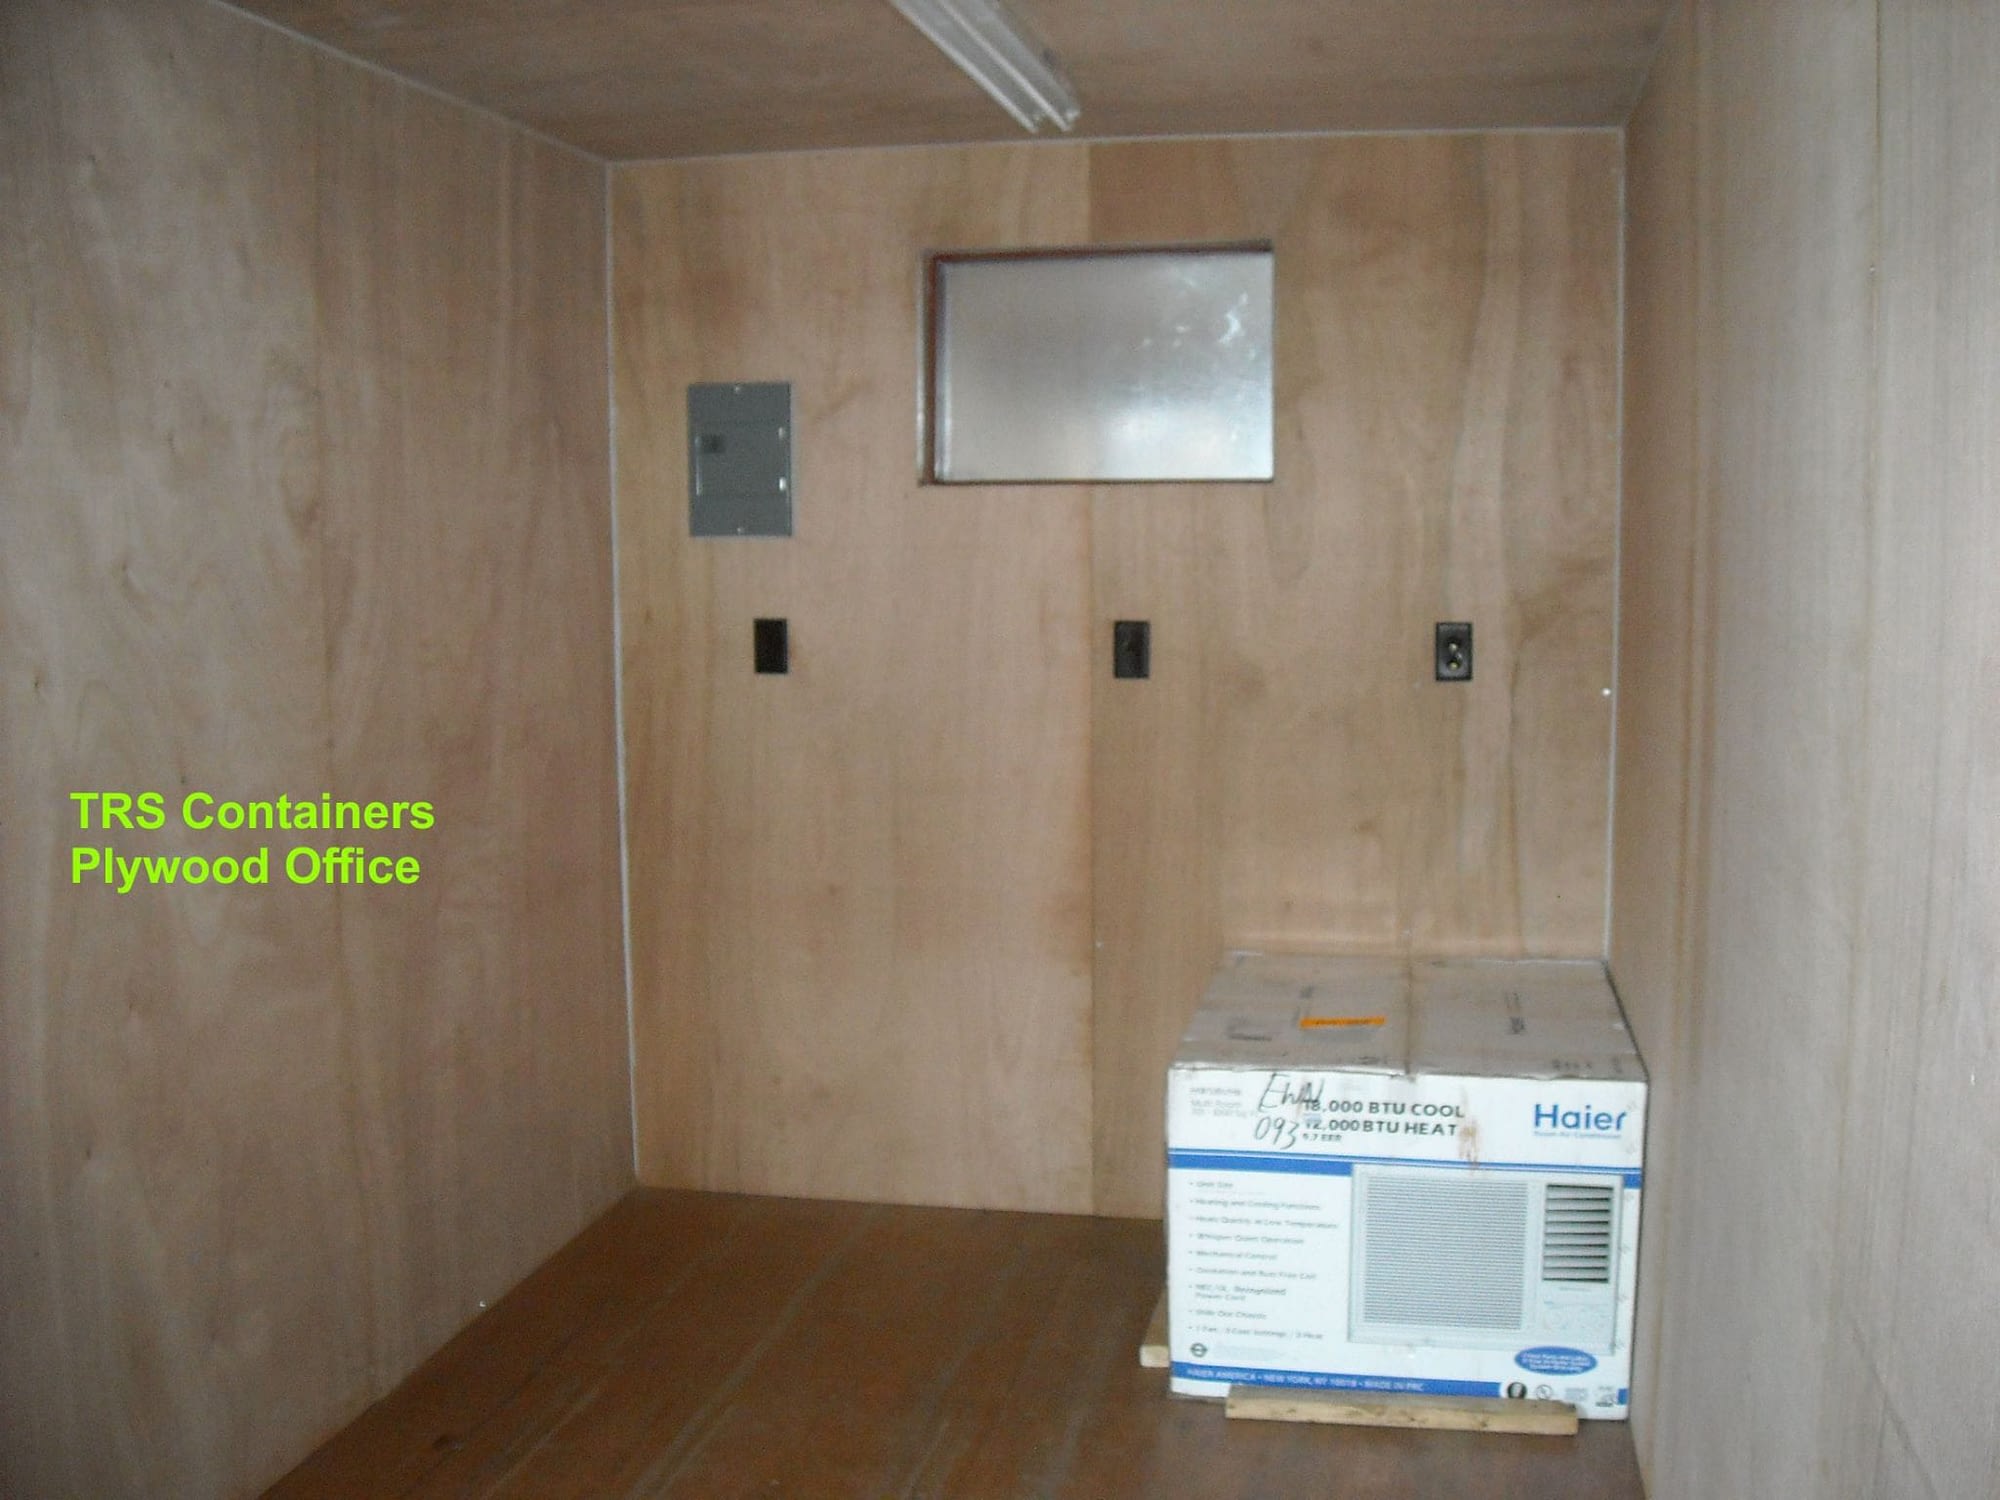 TRS Containers basic plywood lined outfitted office workspace